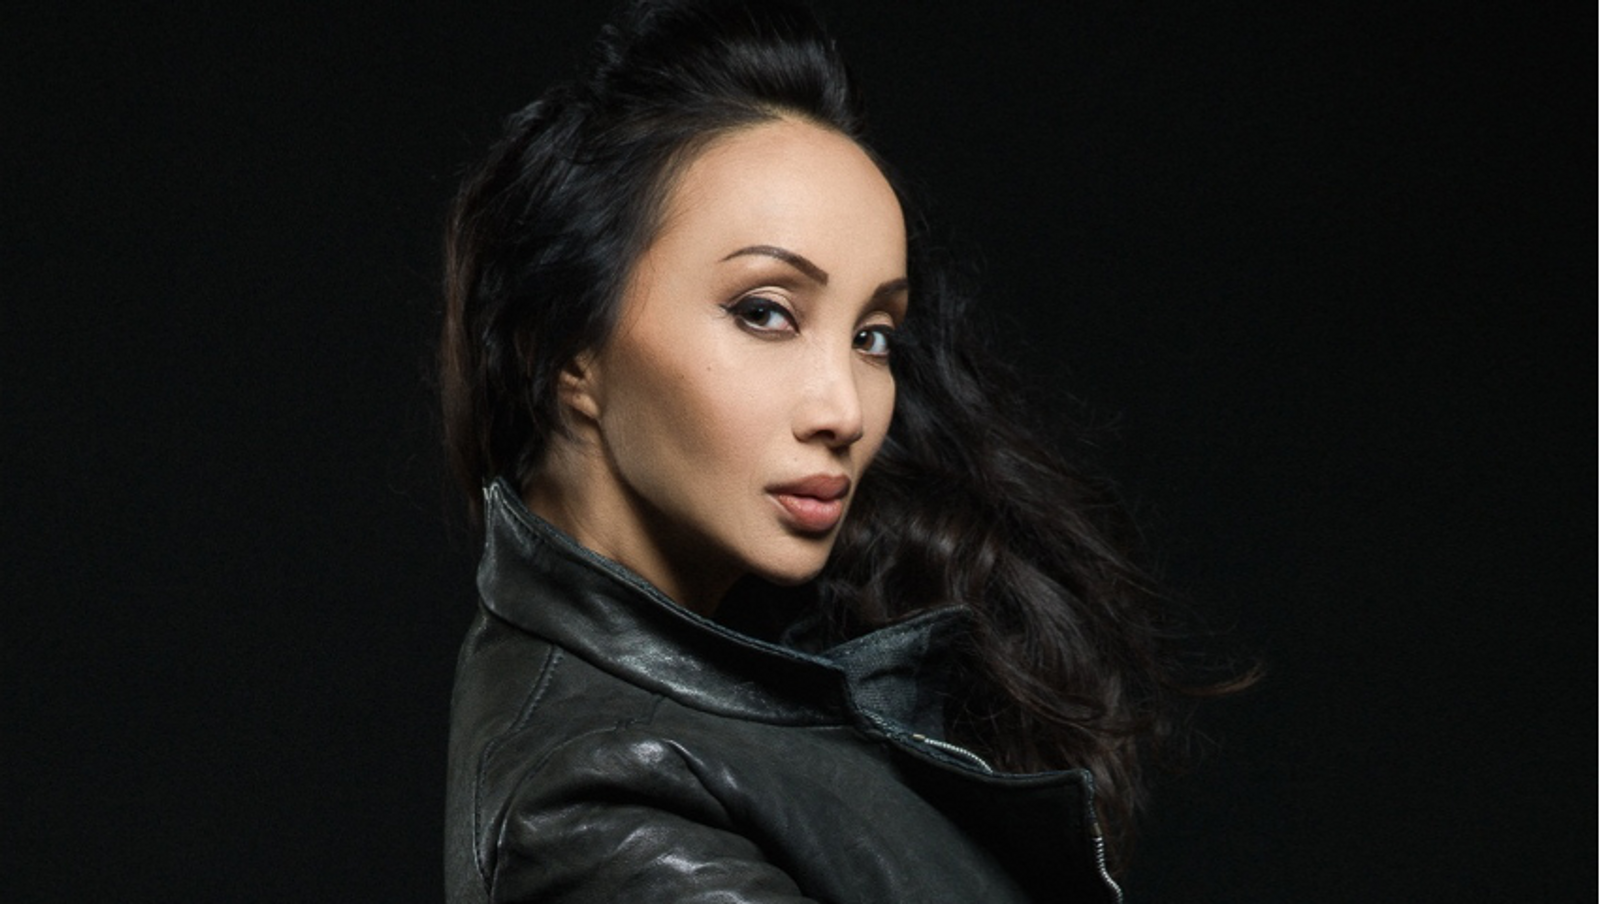 Q&A: Katsuni Discusses New Song, Career in Wellness